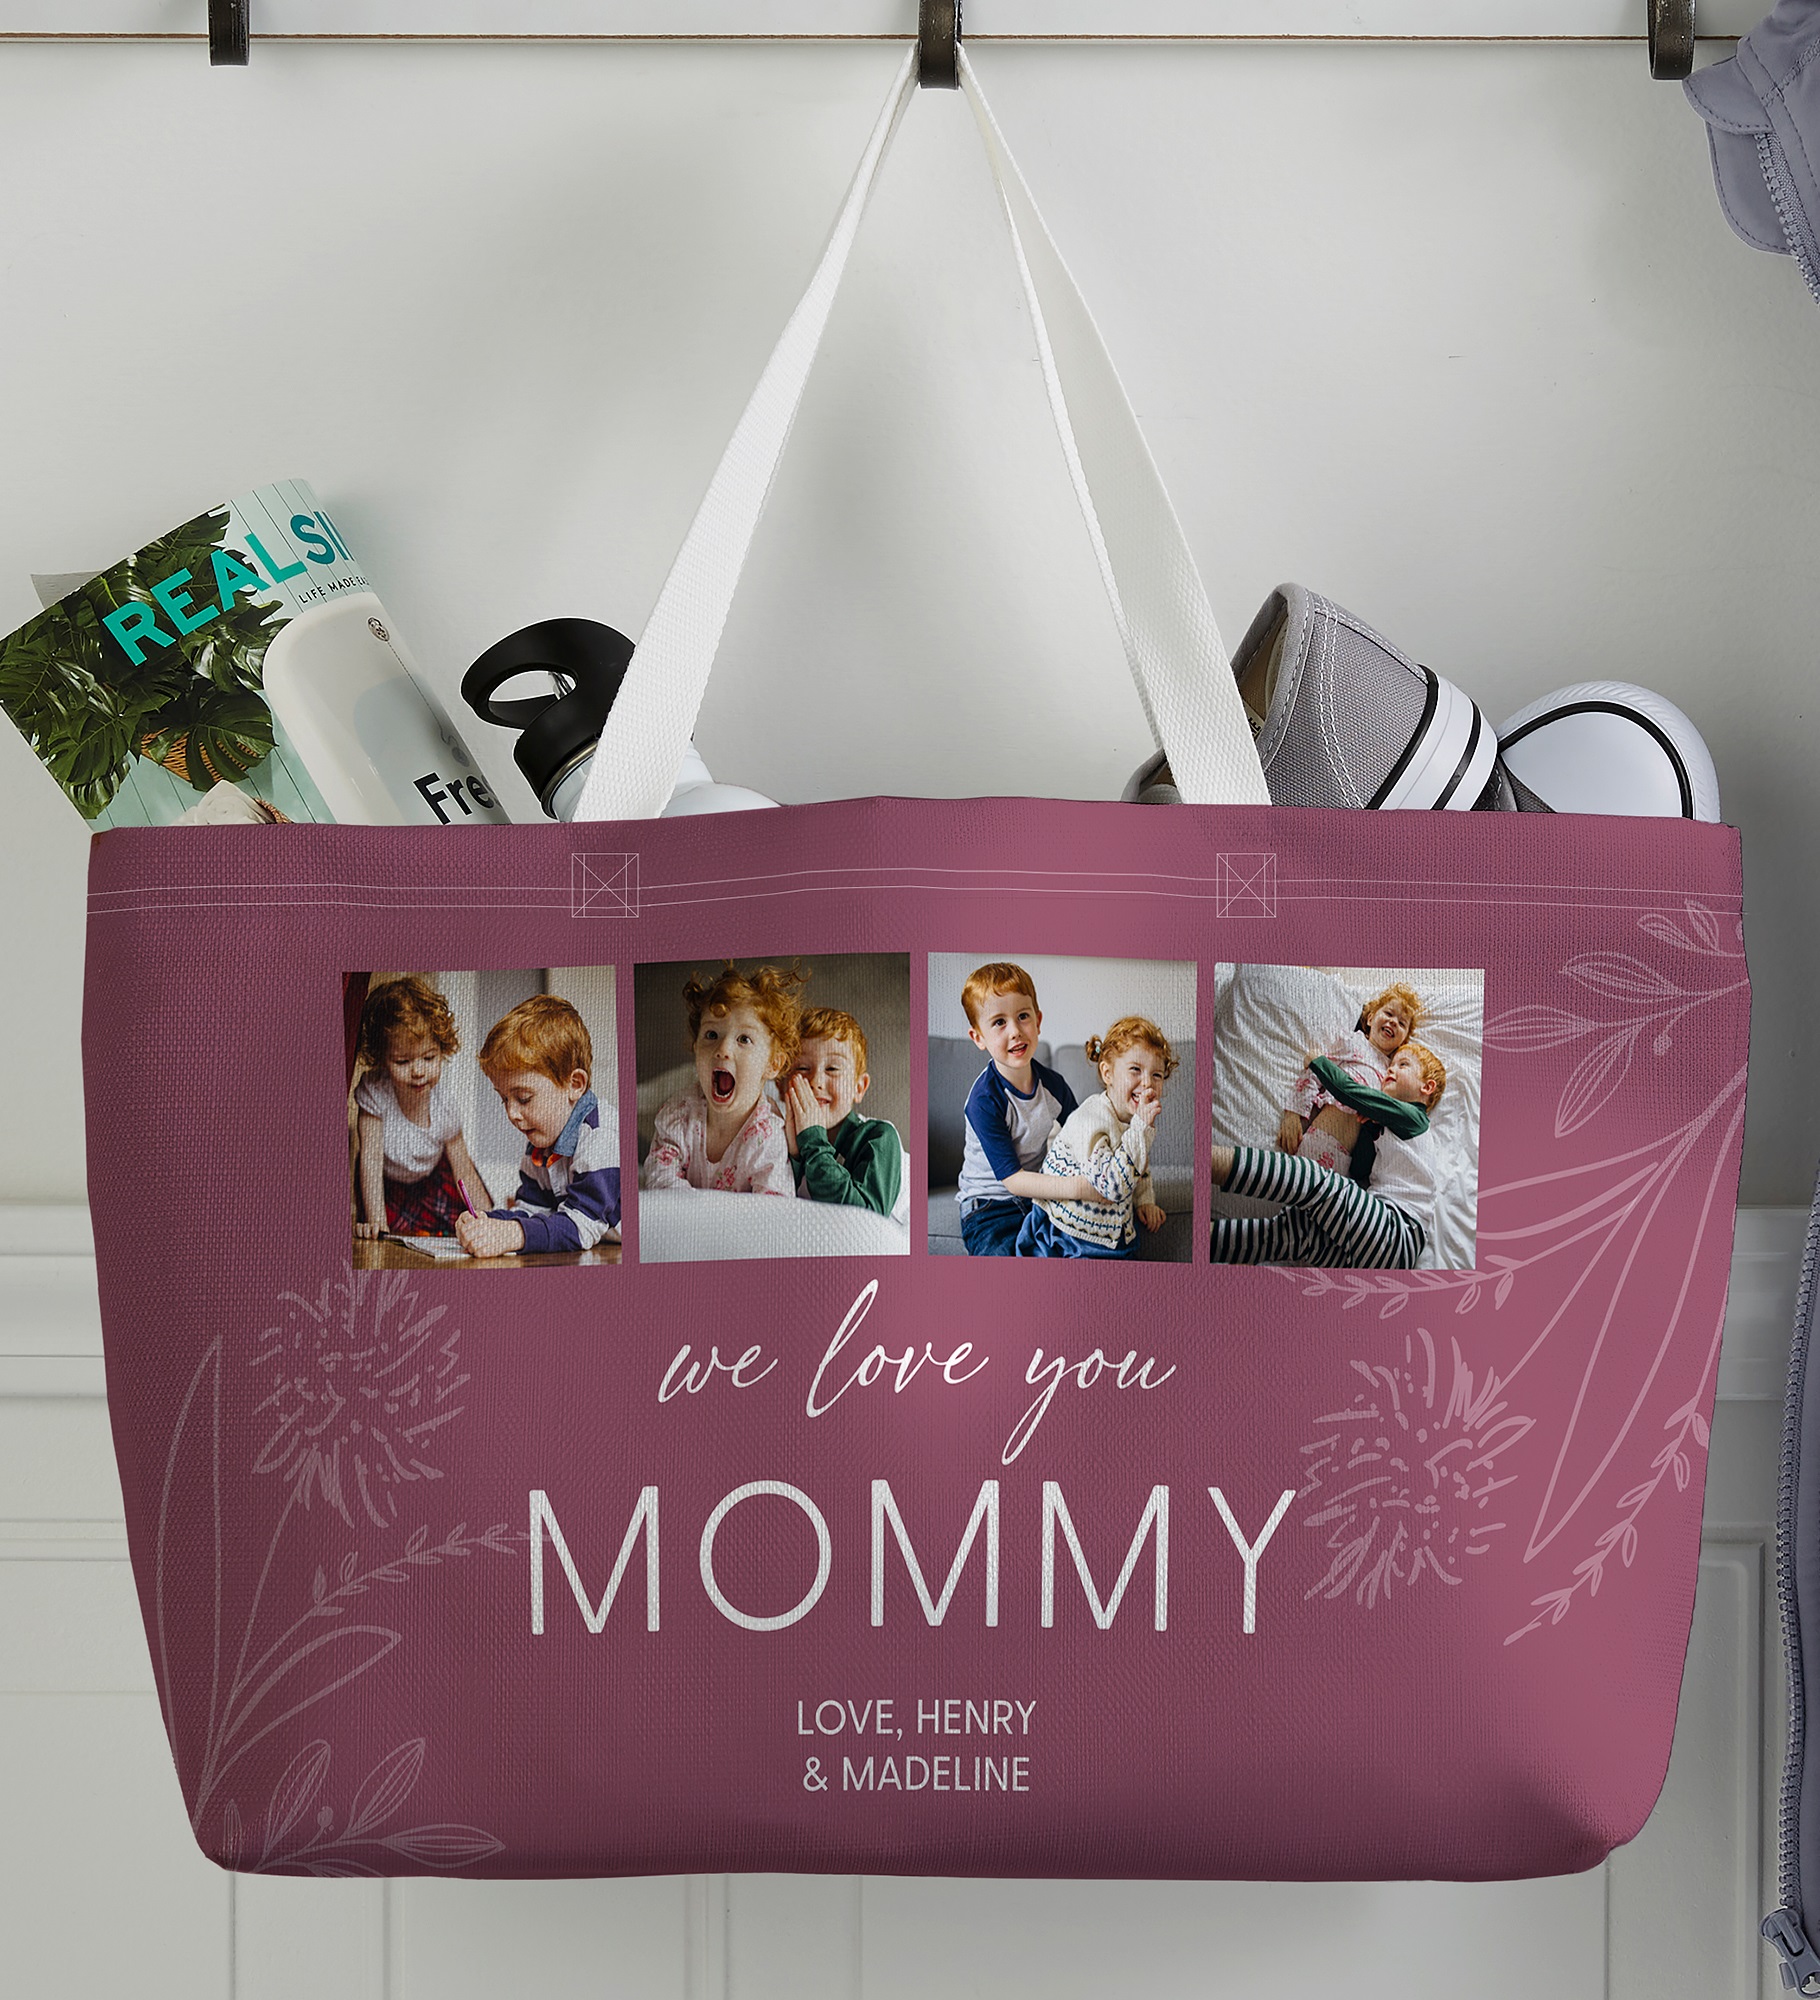 Her Memories Photo Collage Personalized Tote Bag